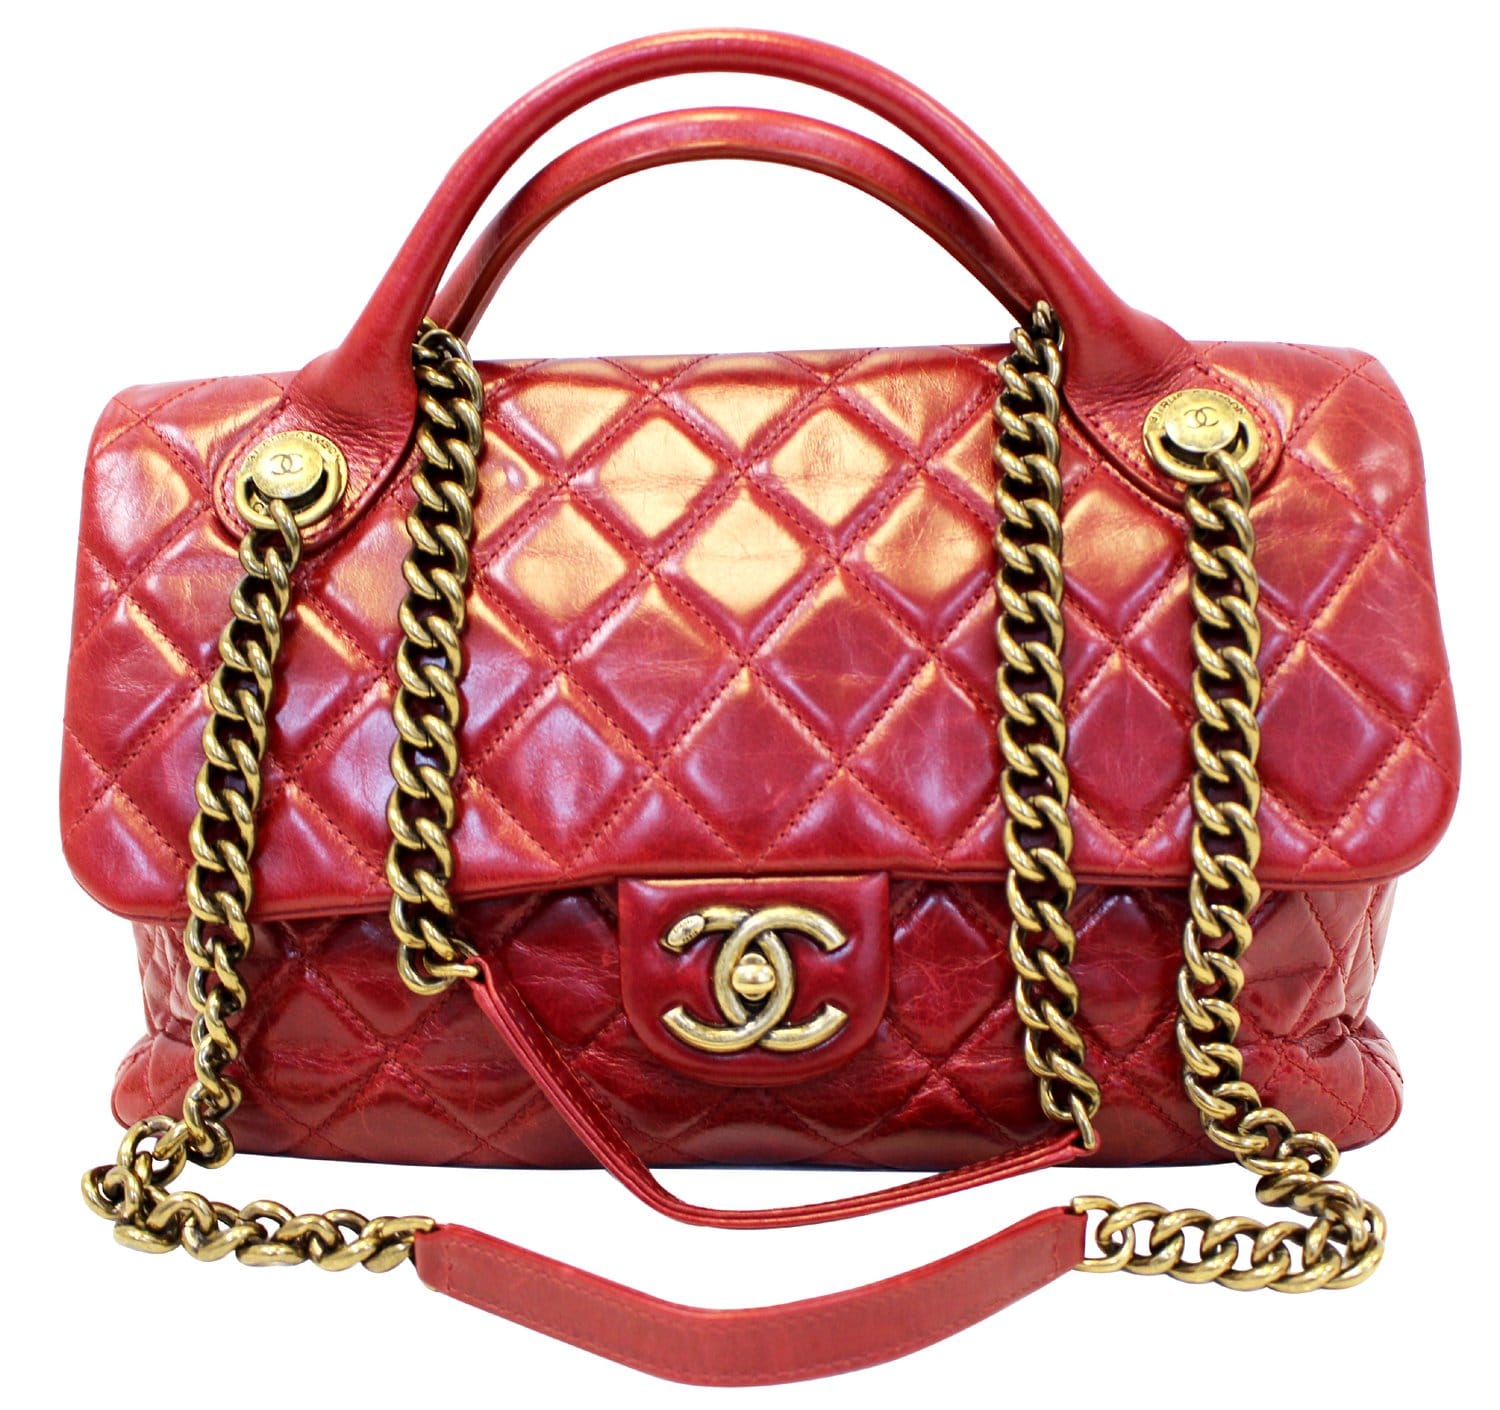 Chanel City Rock Quilted Leather Shopping Tote Bag Burgundy Goatskin  with